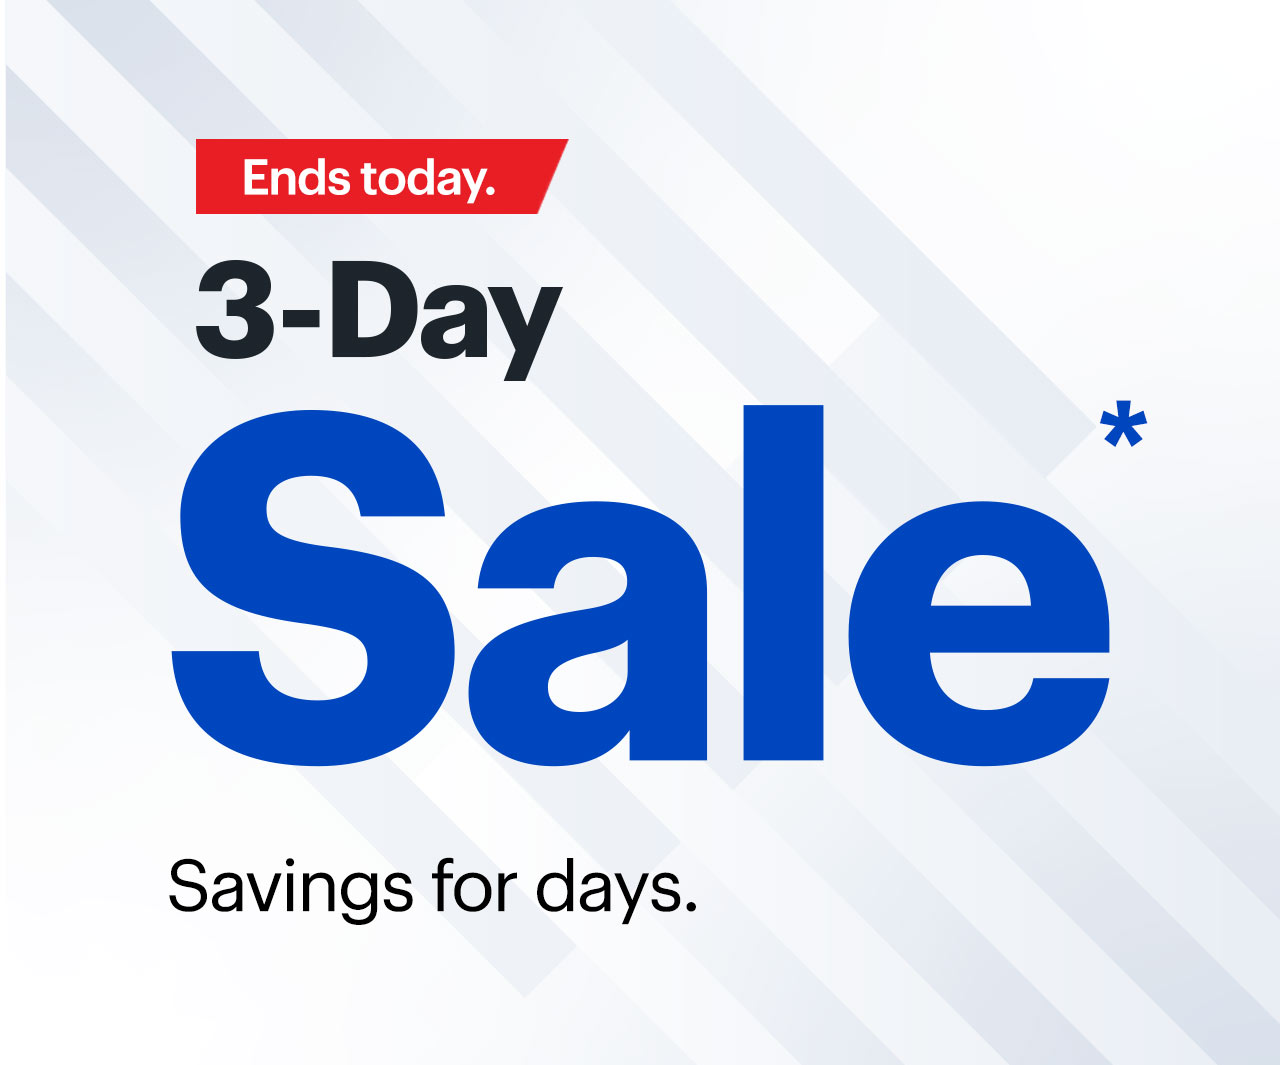 3-Day Sale Ends today. Savings for days. Reference disclaimer.